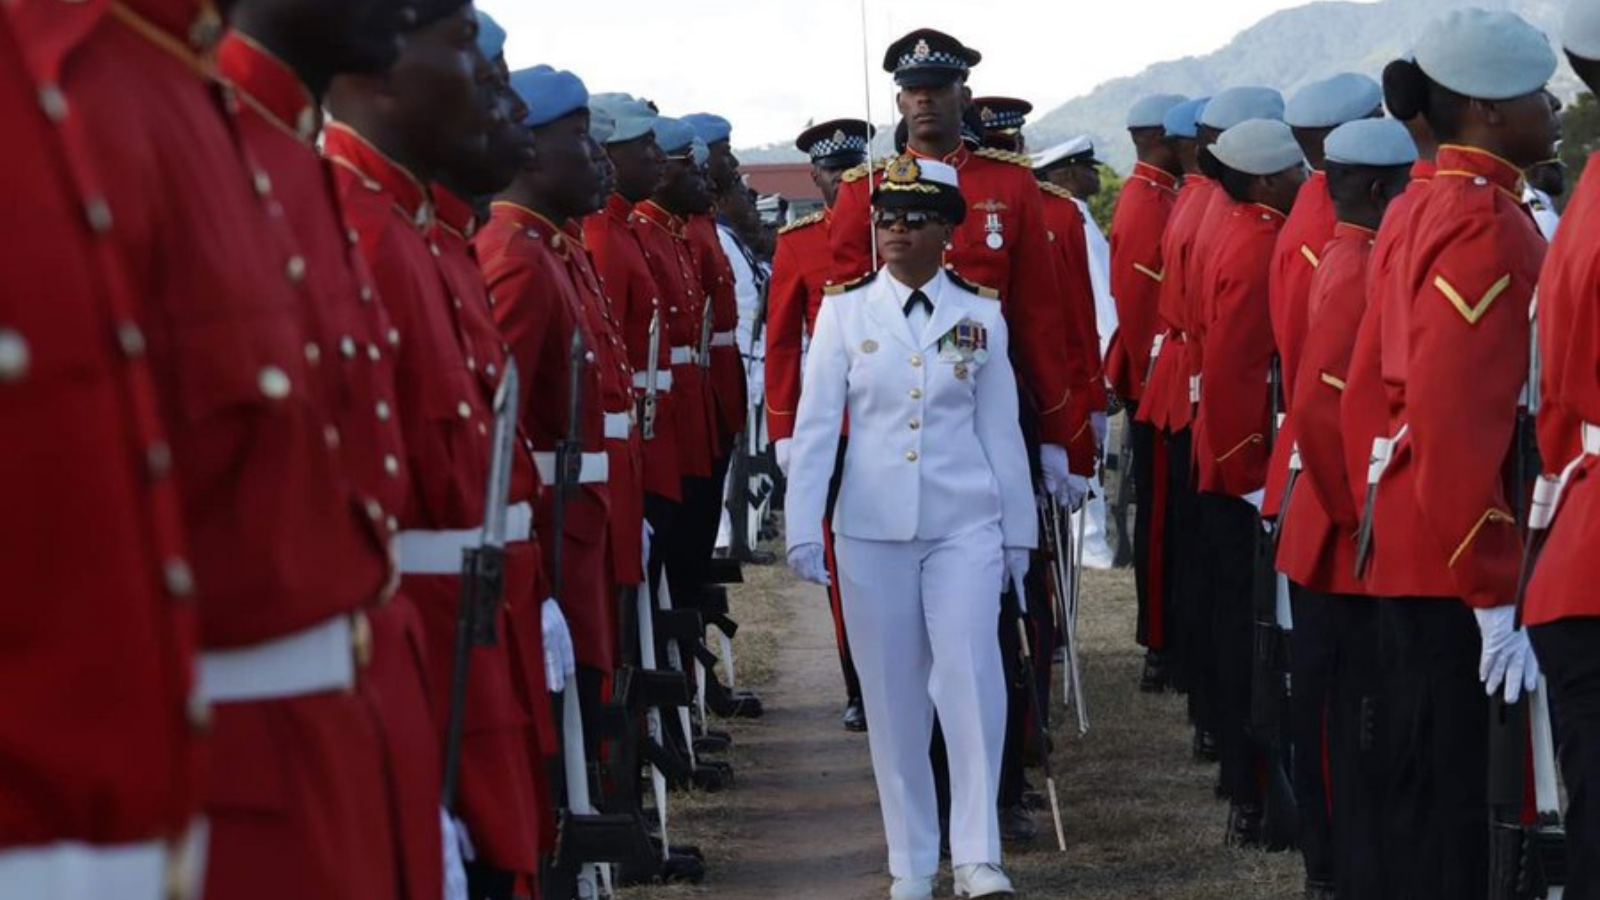 In 2019, Commodore (Cdre) Antonette Wemyss-Gorman became the highest-ranking female officer in the Jamaica Defence Forces (JDF). Cdre Wemyss-Gorman is now the Force Executive Officer (second in command) of the JDF. (Photo courtesy of U.S. SOUTHCOM)